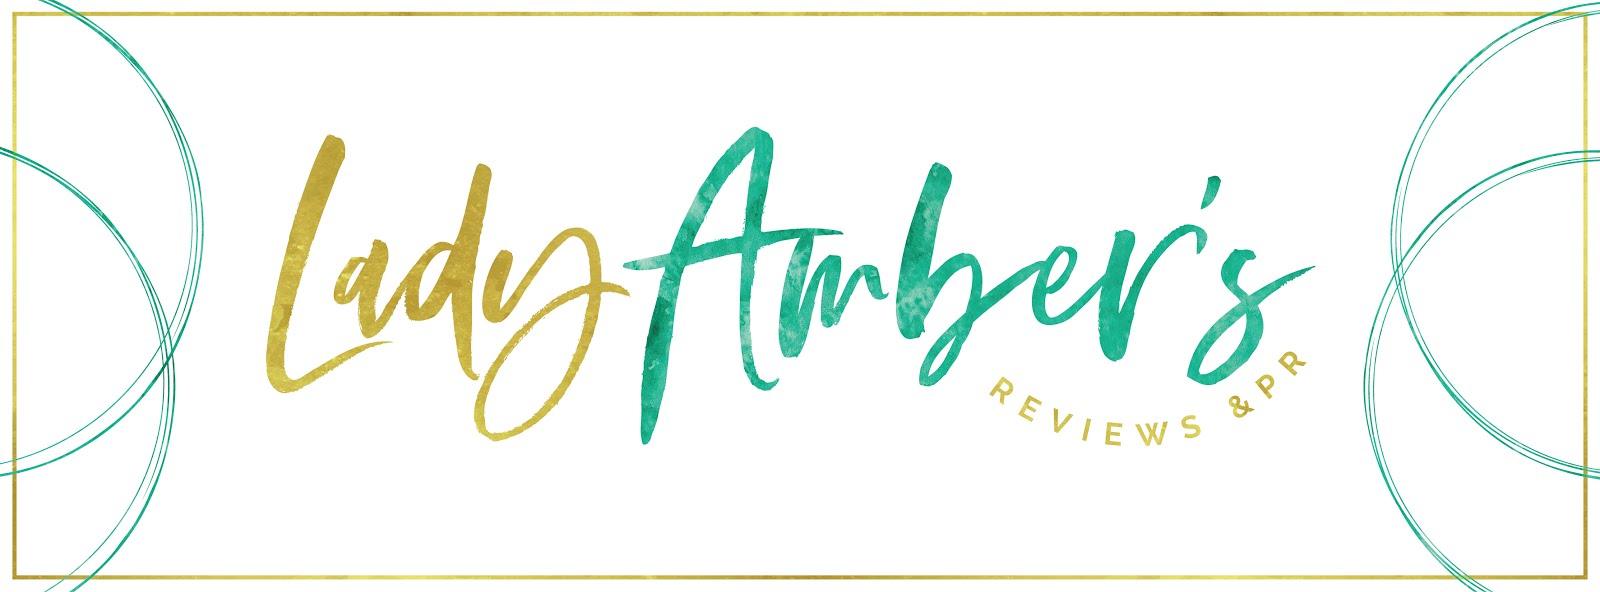 Lady Amber's Reviews